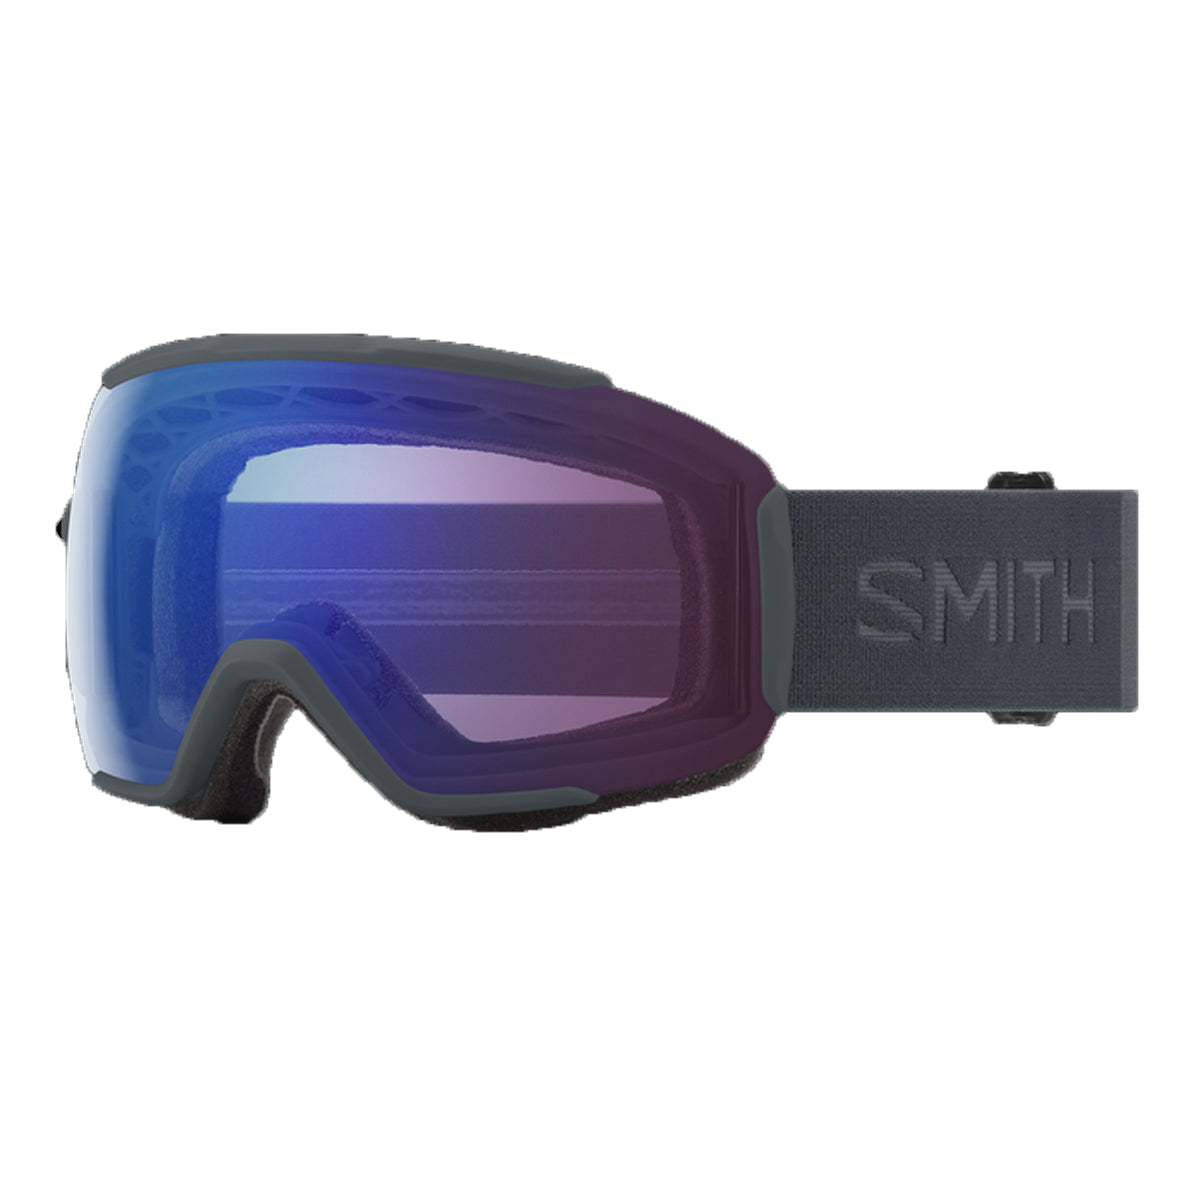 SMITH SEQUENCE OTG SNOWBOARD GOGGLES - LOW BRIDGE FIT (PHOTOCHROMATIC LENS)